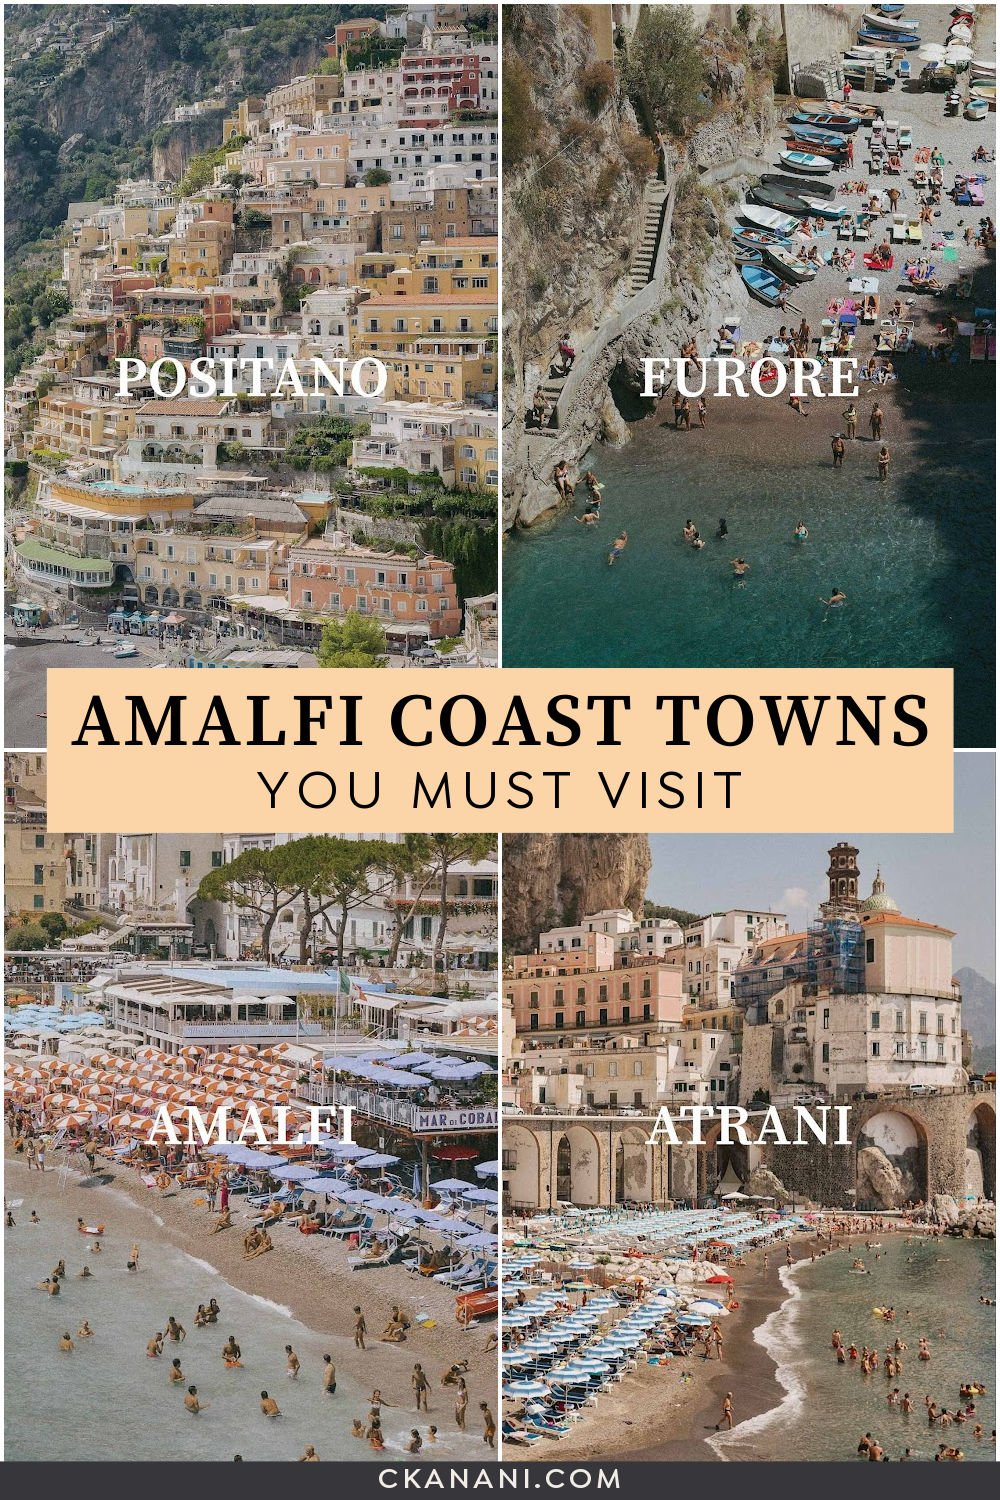 The Amalfi Coast Towns you must visit + an Amalfi Coast map. How to get around the coast, the best town to stay in Amalfi Coast, and more. Positano guide, Positano itinerary